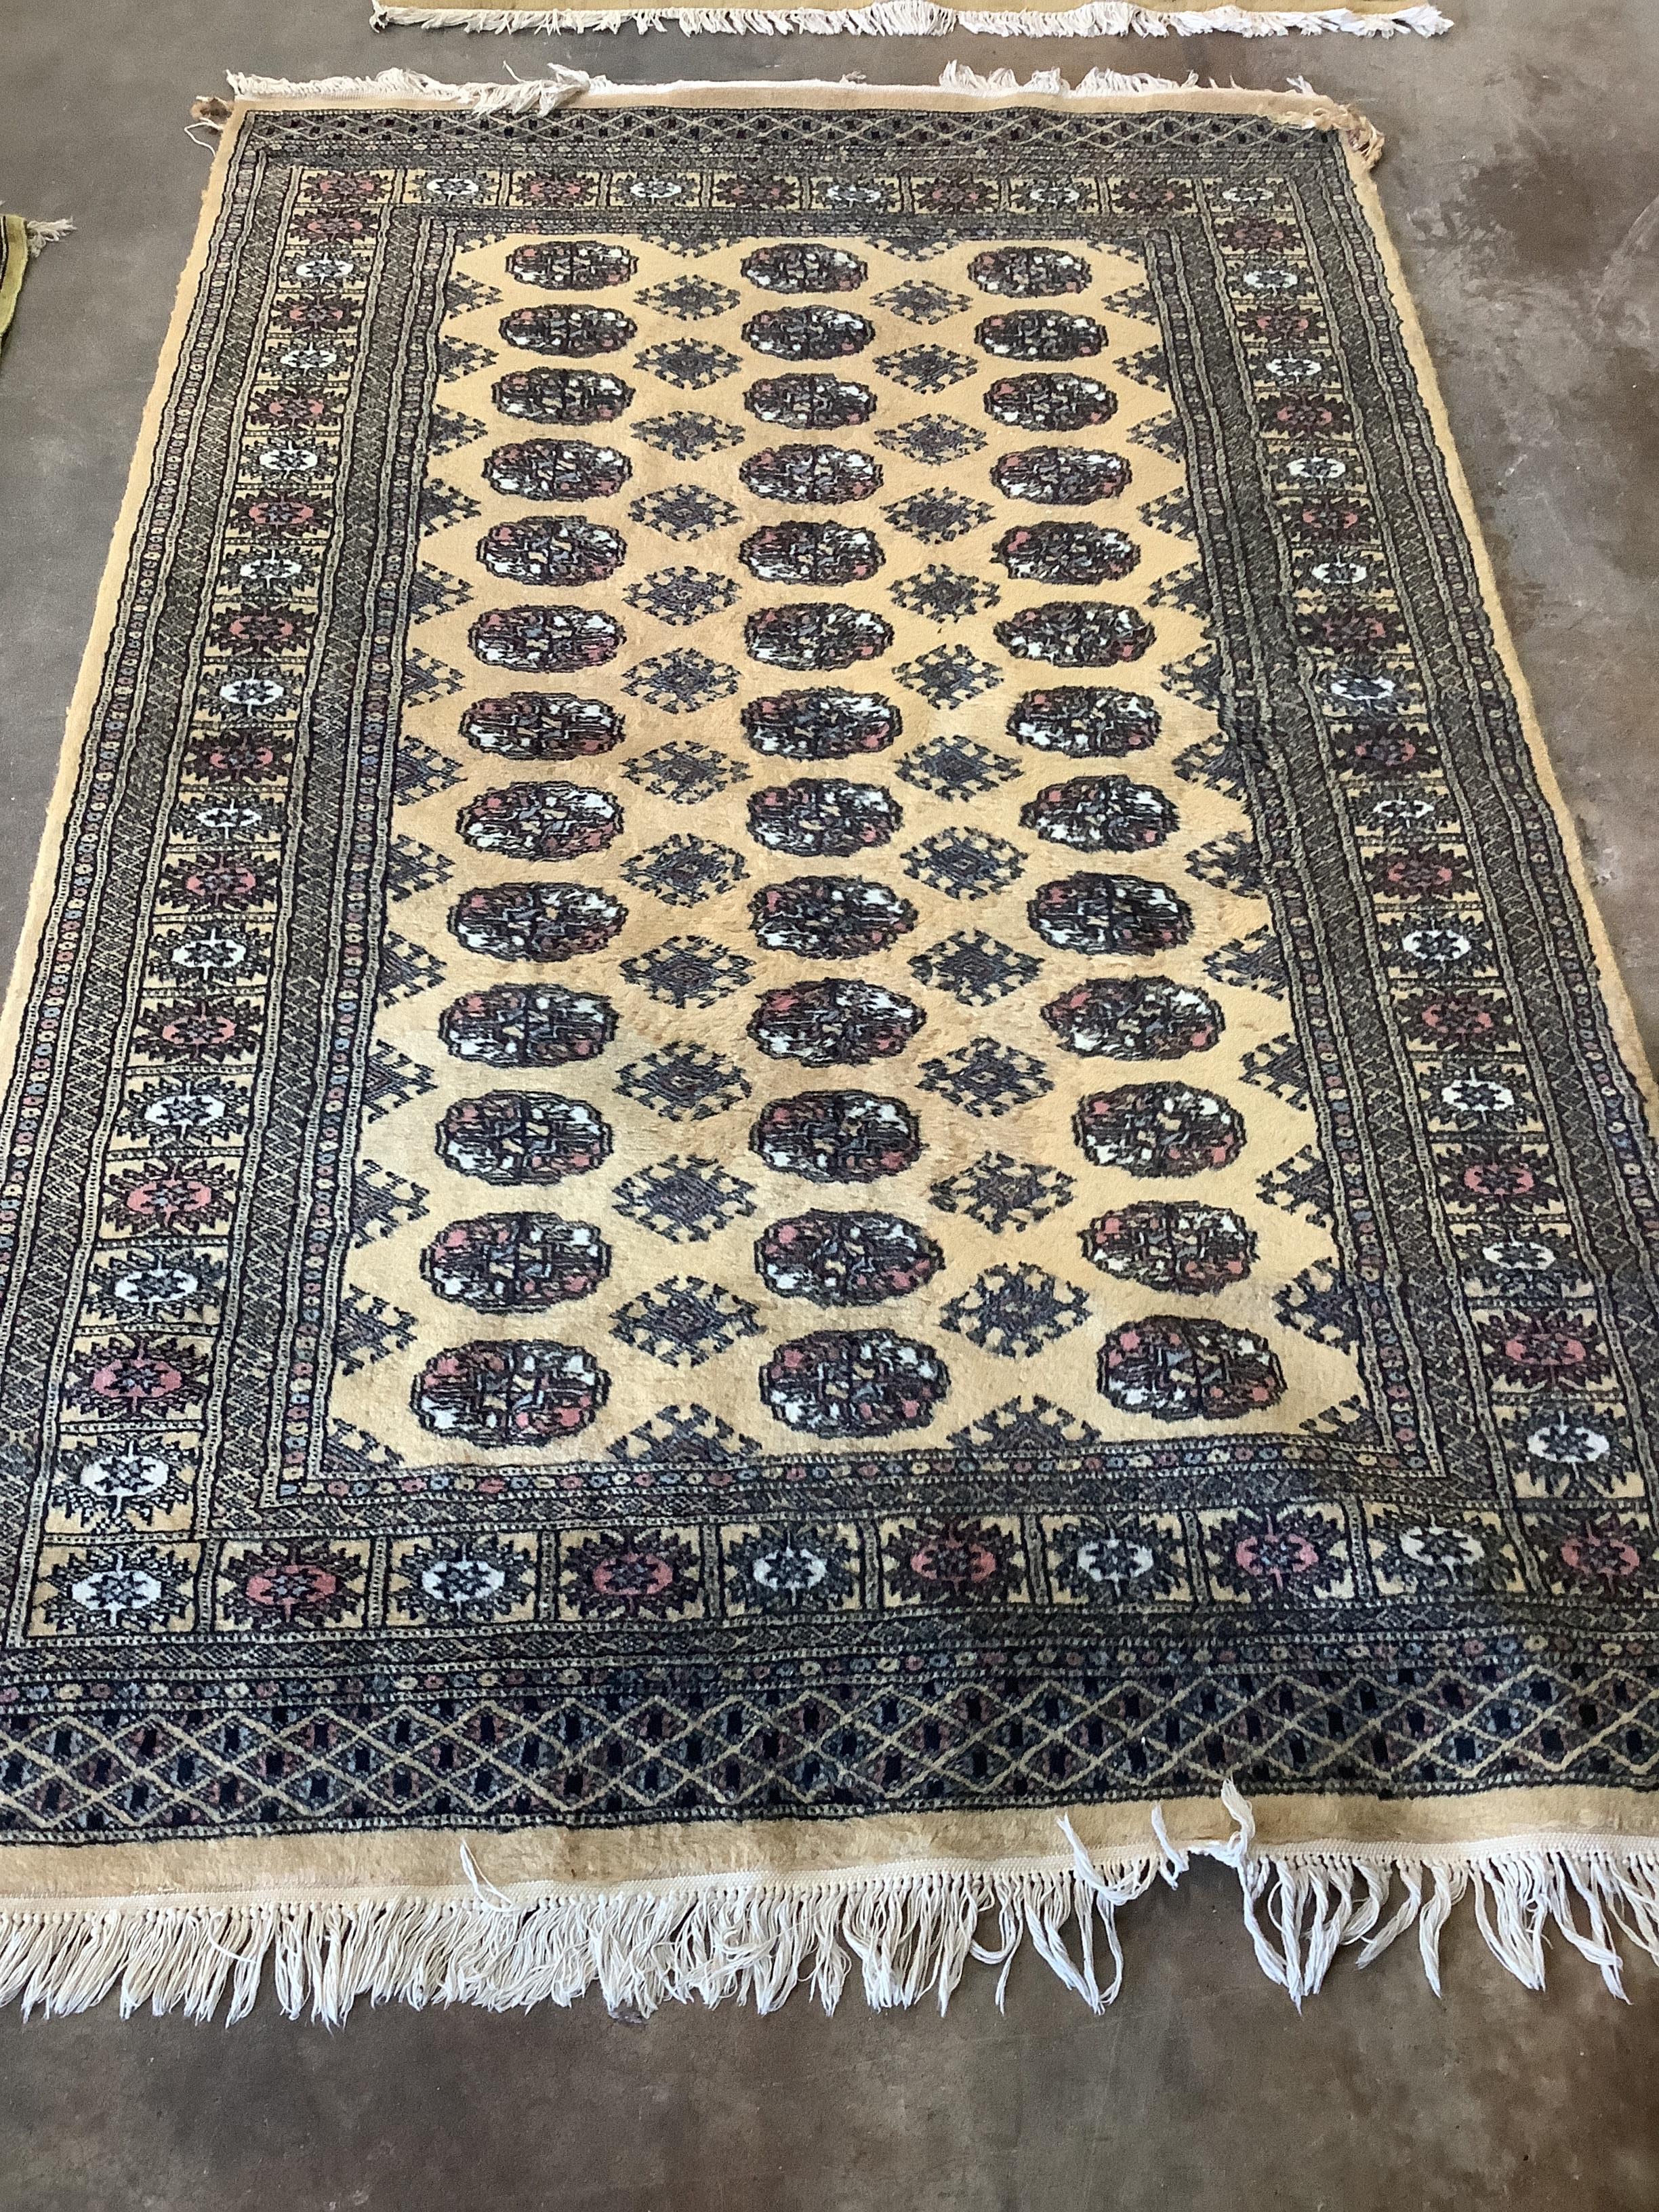 A Bokhara style cotton pile rug, 192 x 124cm***CONDITION REPORT***PLEASE NOTE:- Prospective buyers